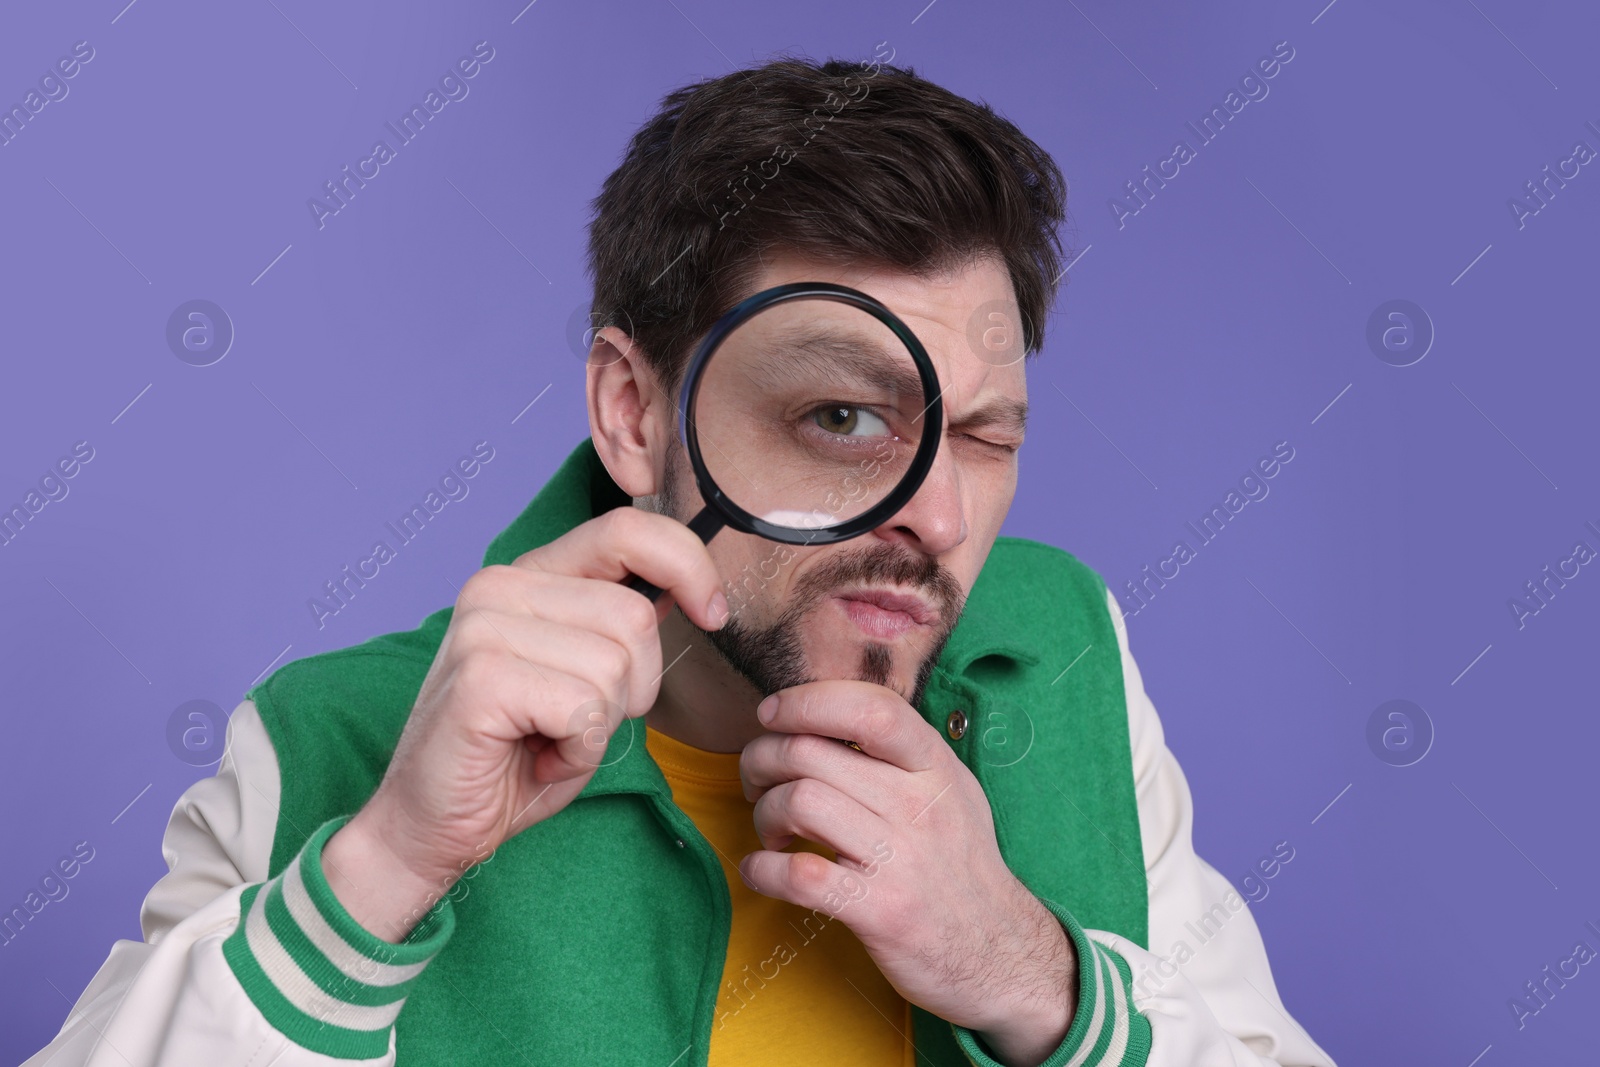 Photo of Confused man looking through magnifier glass on purple background